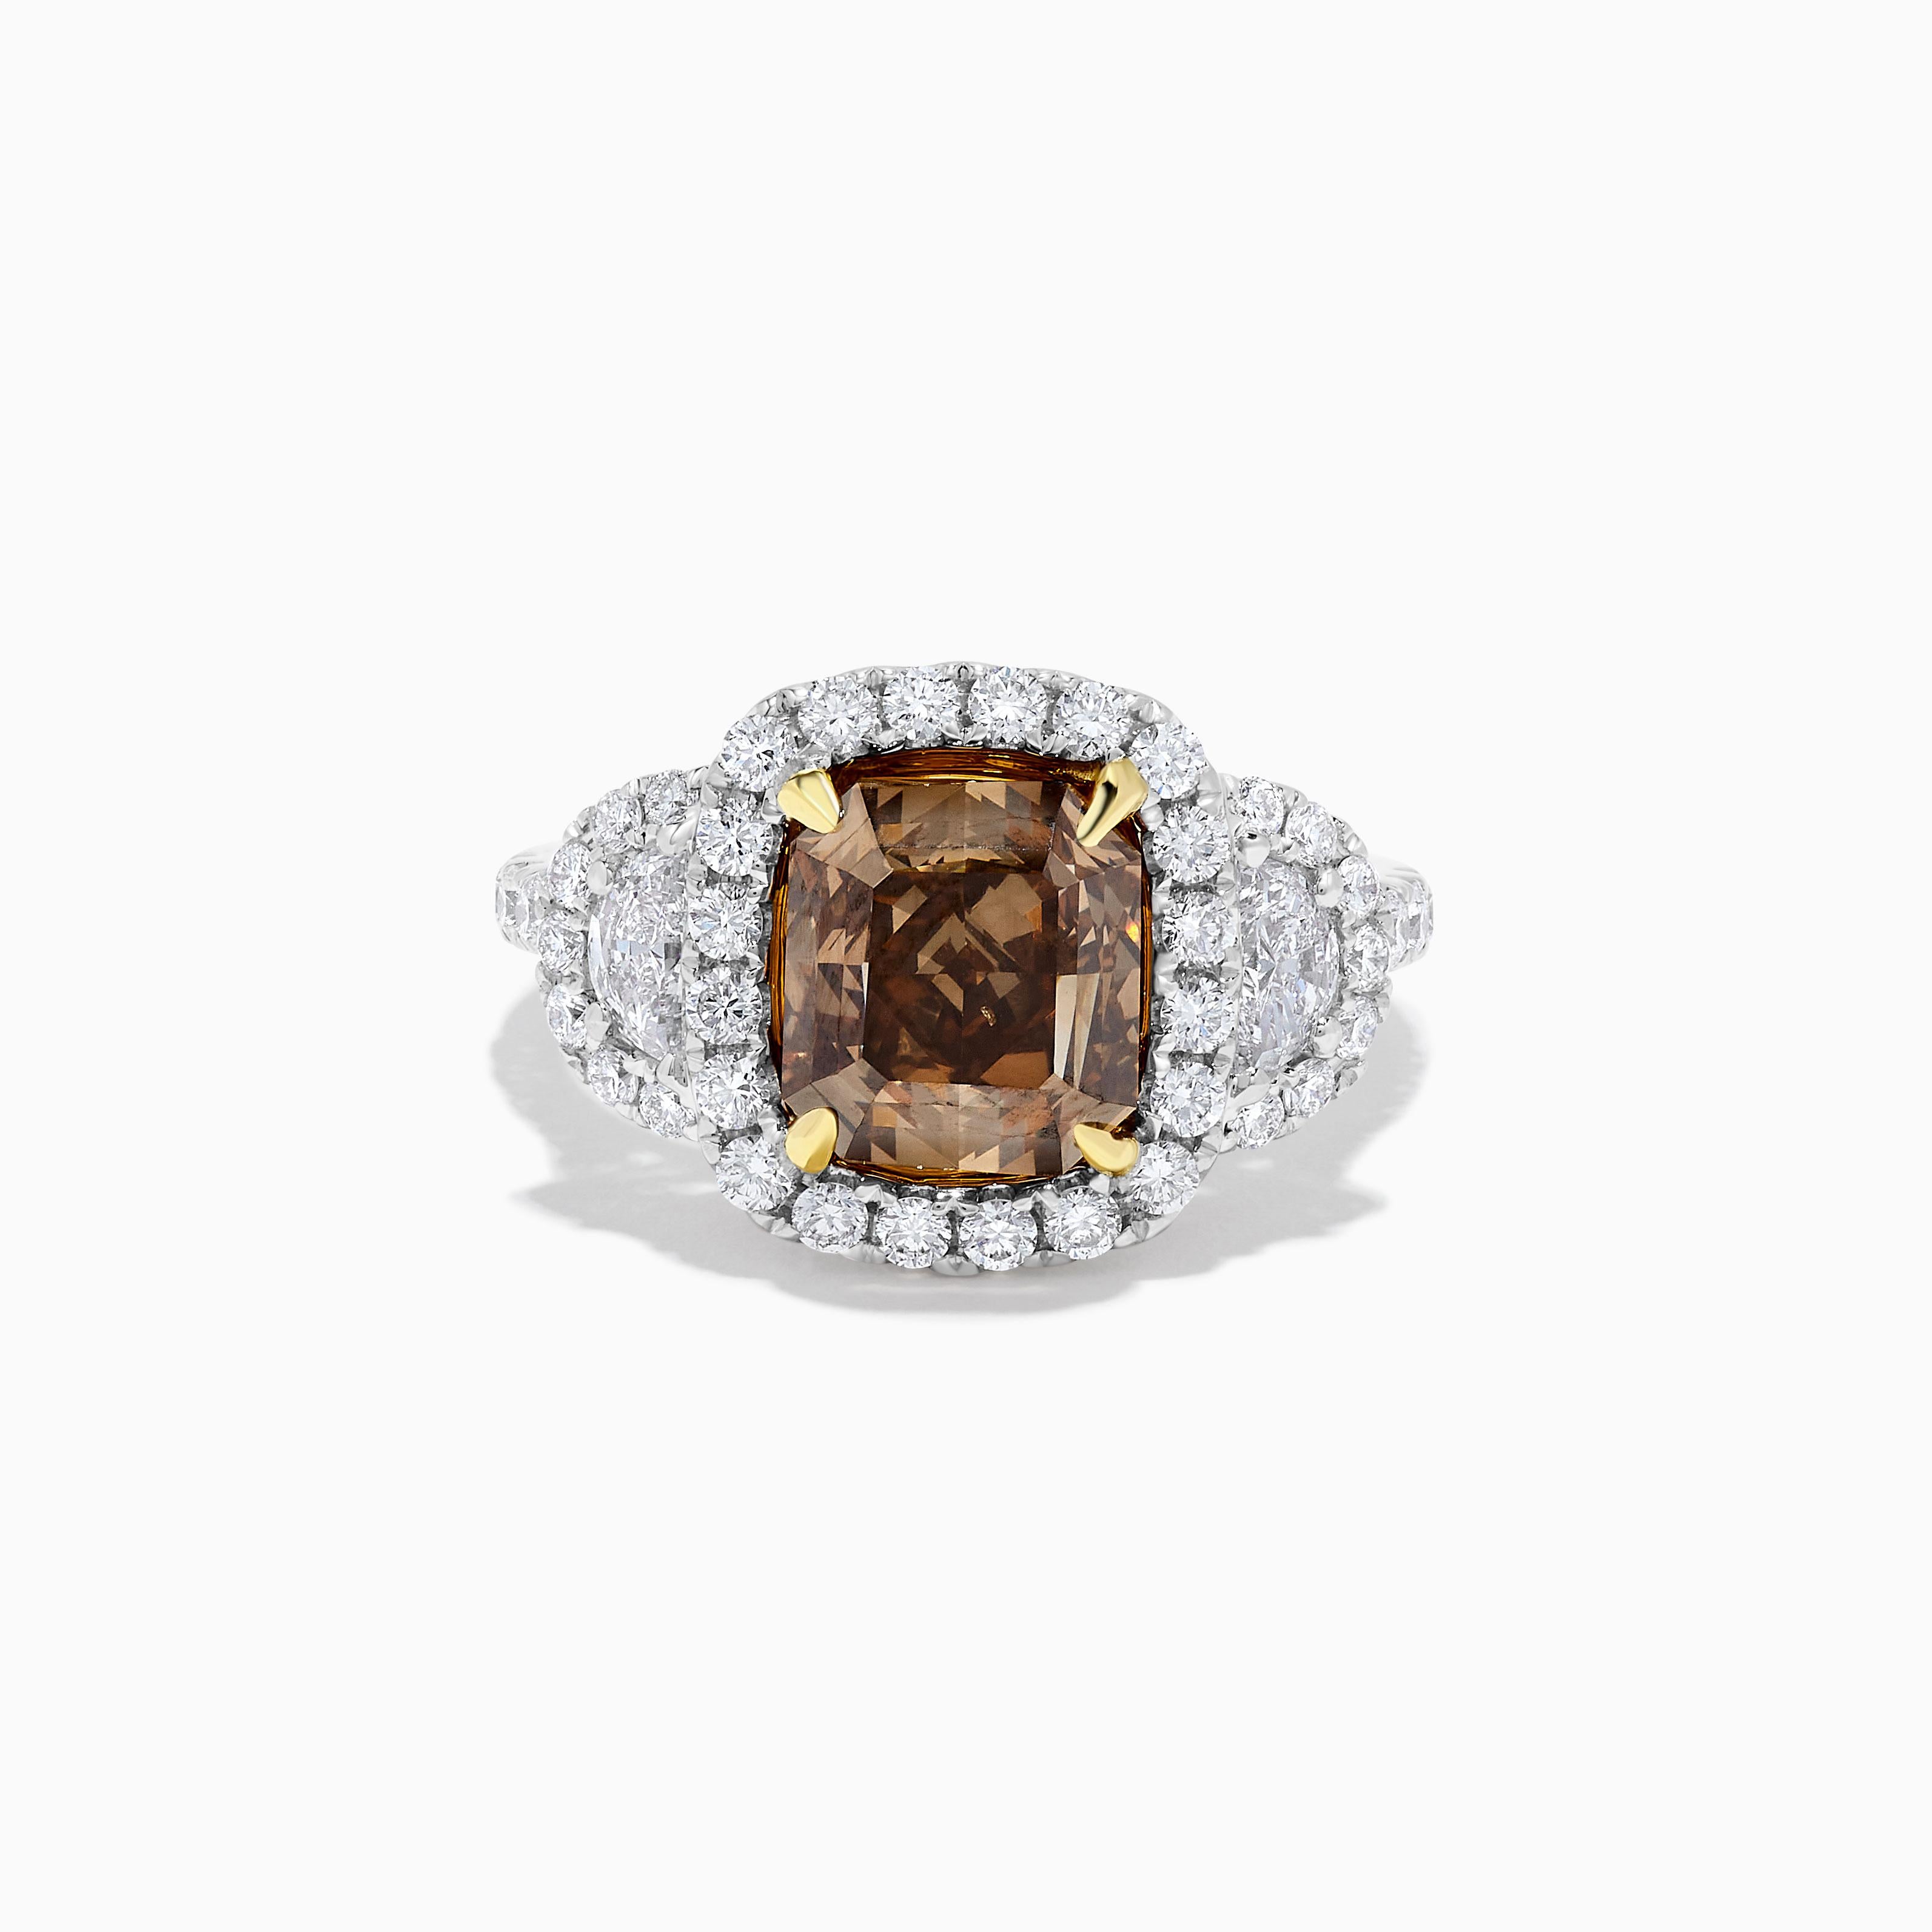 RareGemWorld's classic GIA certified diamond ring. Mounted in a beautiful 18K Yellow and White Gold setting with a natural asscher cut brown diamond. The brown diamond is surrounded by natural trapezoid cut white diamonds and round natural white